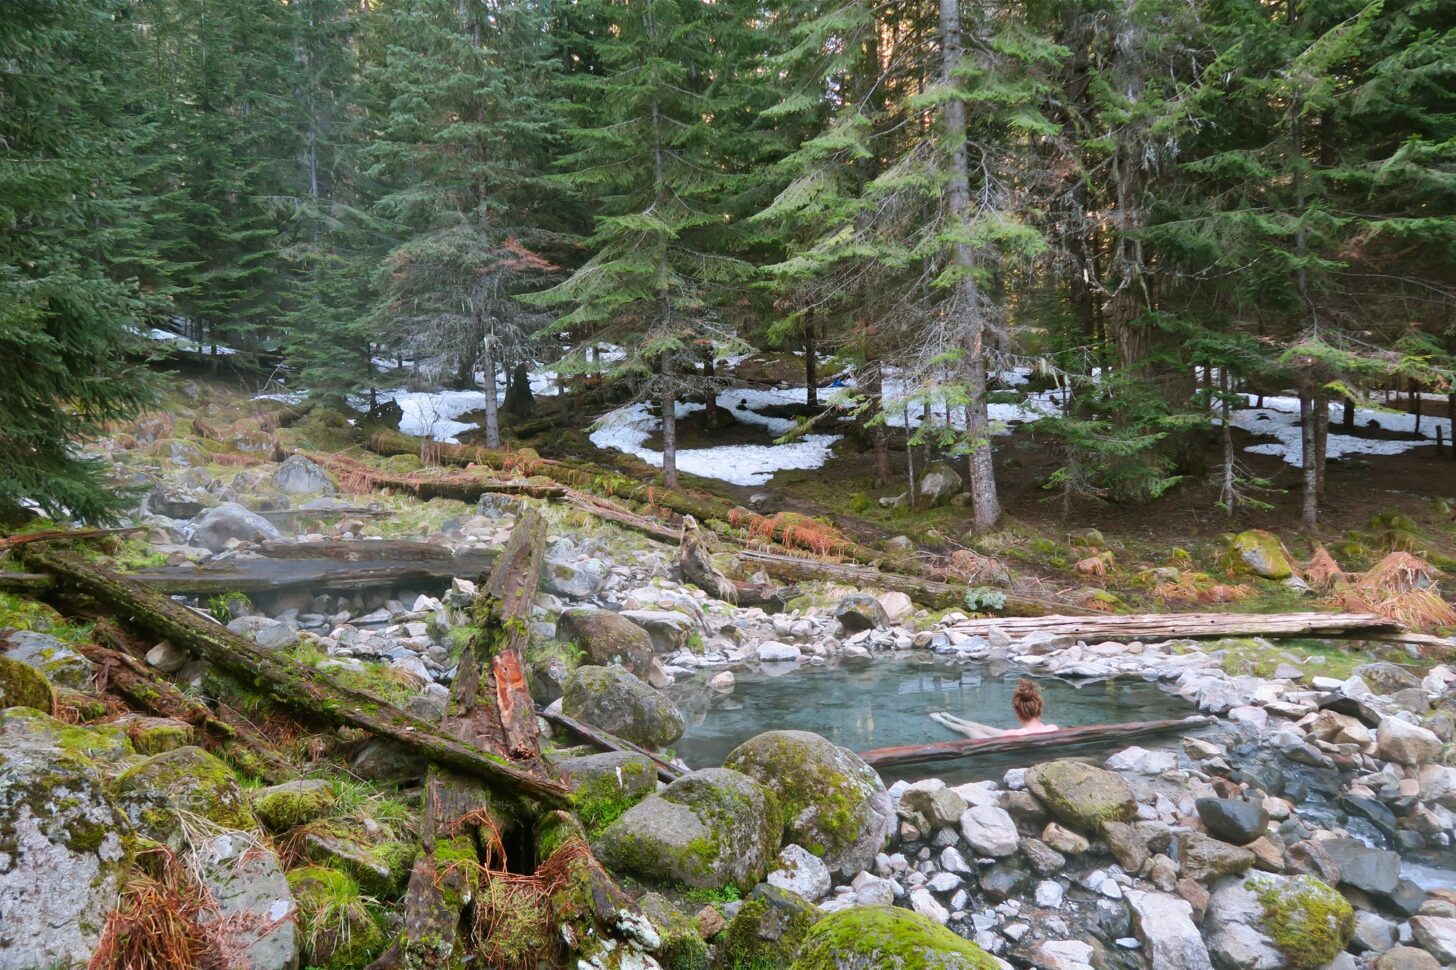 A person soaks in a hot spring in a forested setting.